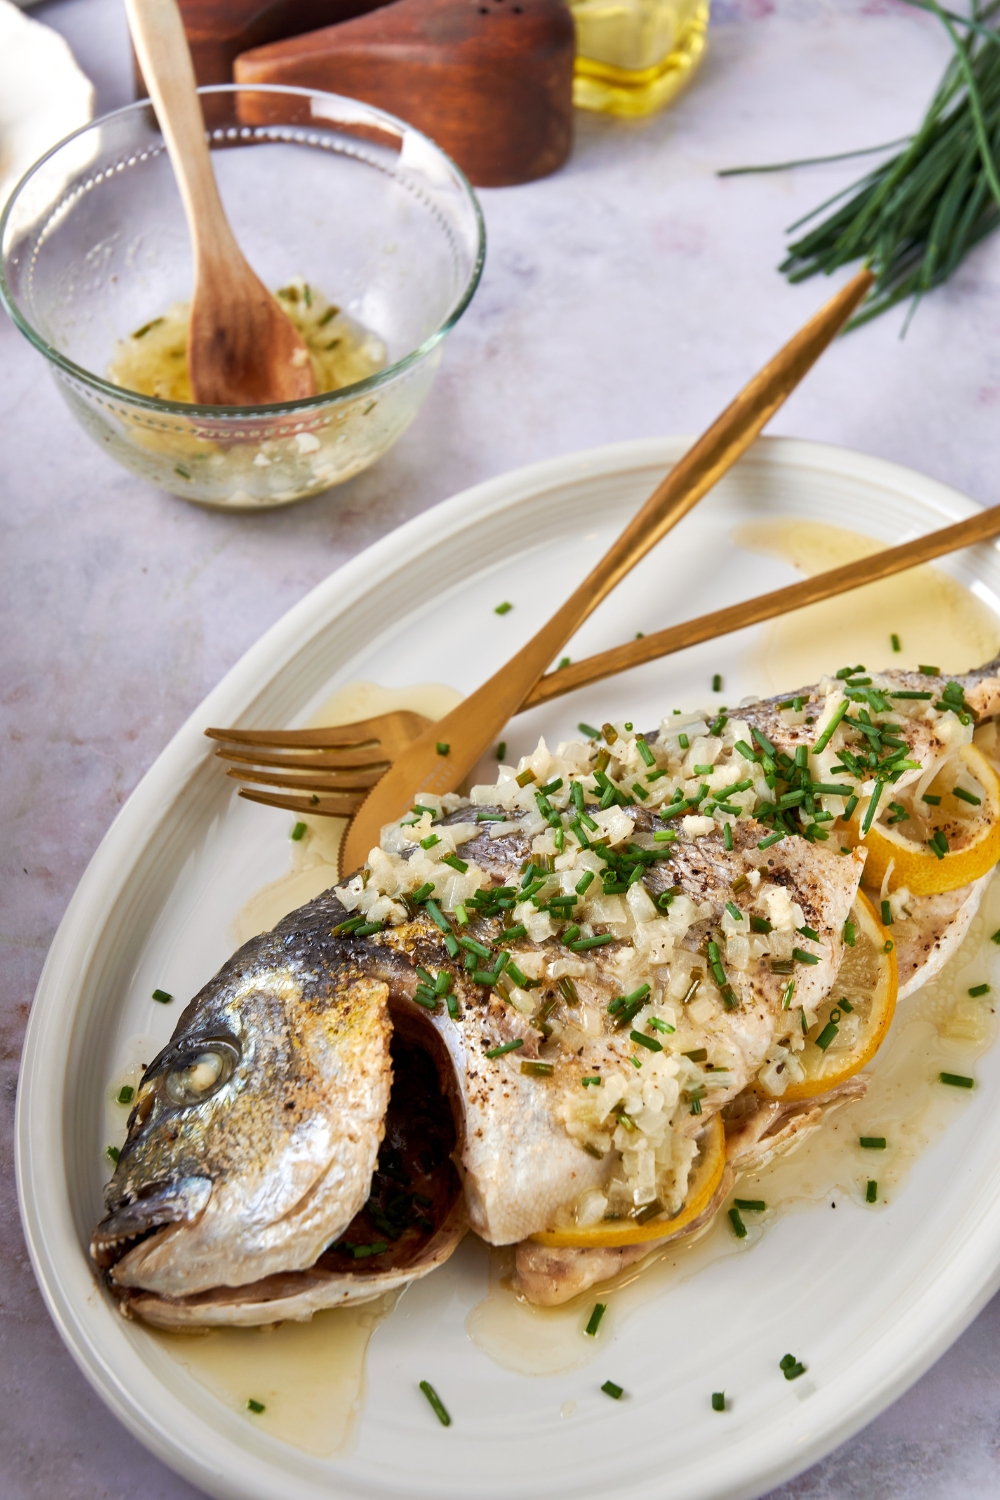 A whole branzino is on a white serving platter. It is covered in lemon garlic sauce and chives. Golden serving utensils rest on the platter.